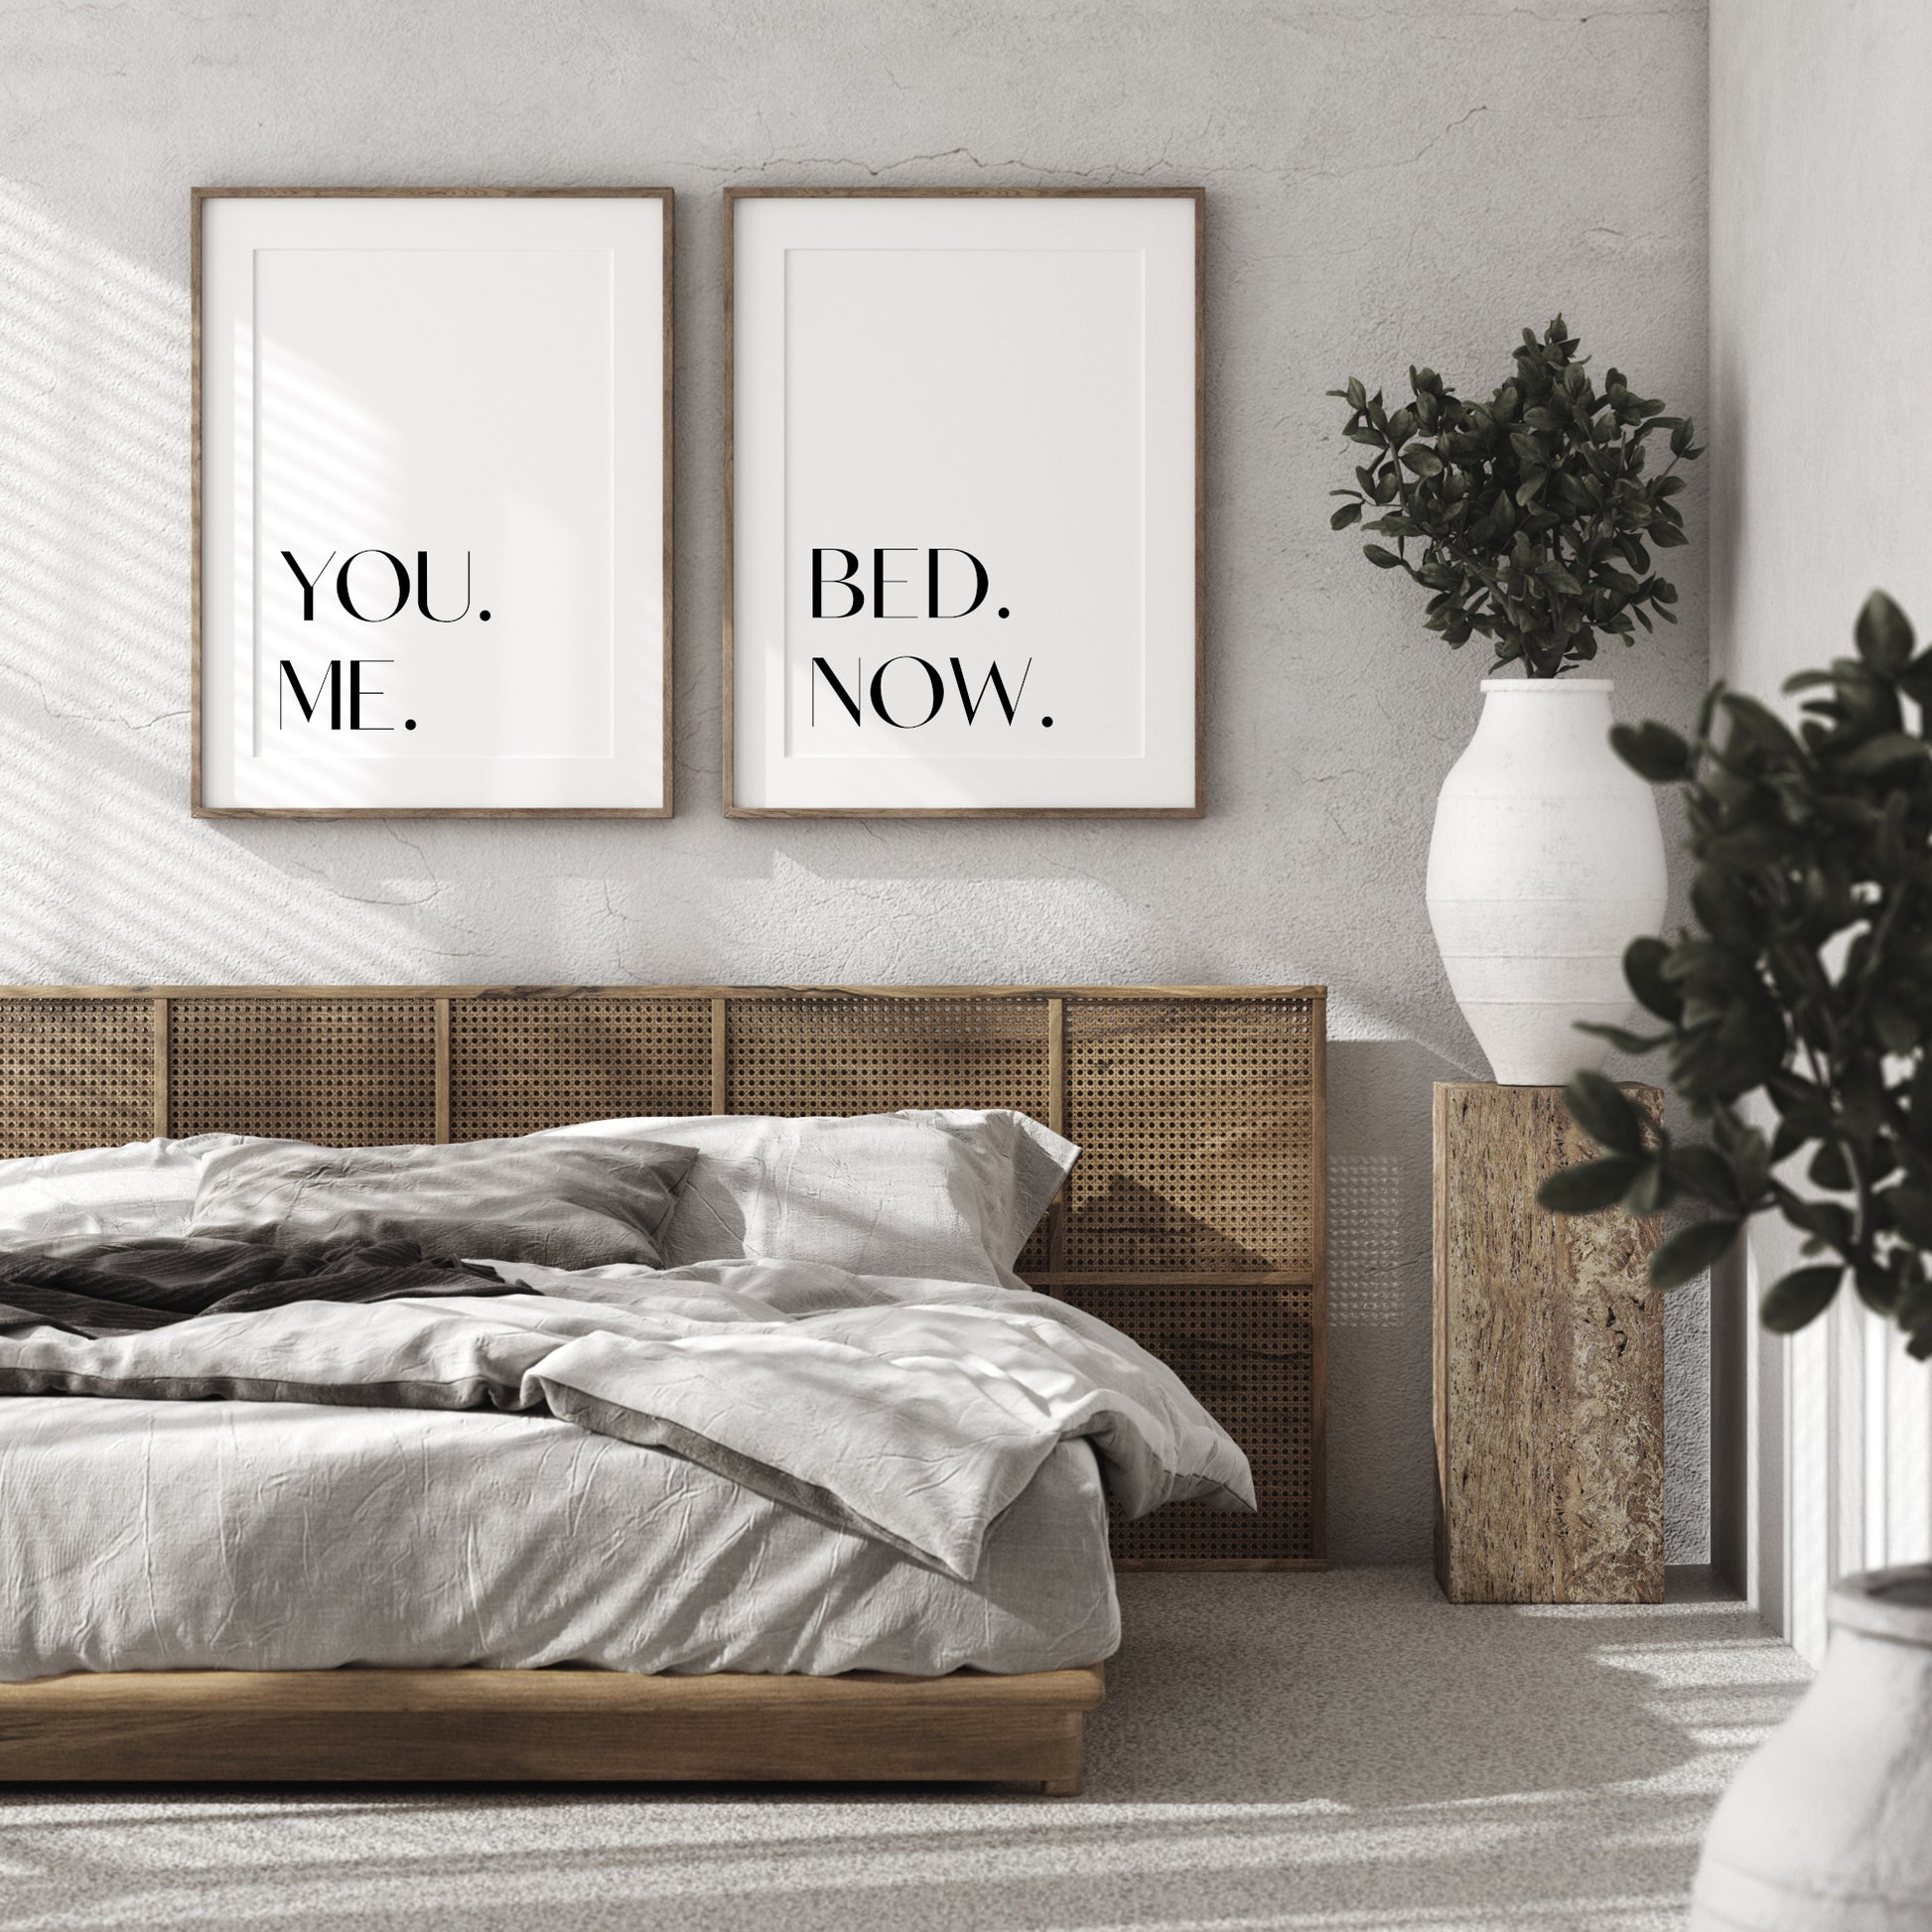 You. Me. Bed. Now. print by Finlay and Noa